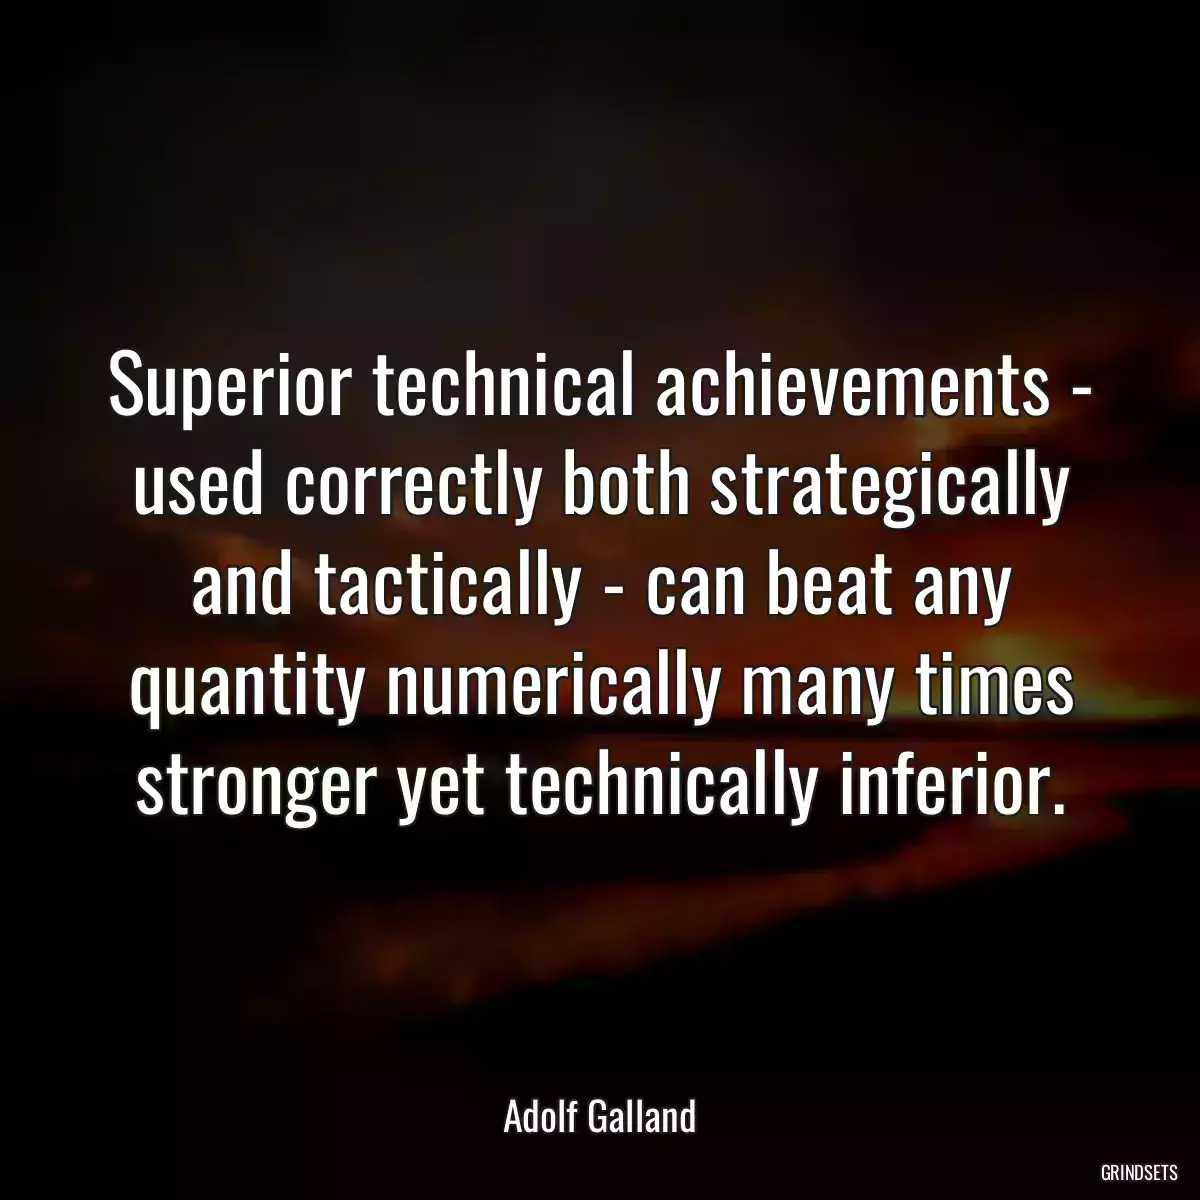 Superior technical achievements - used correctly both strategically and tactically - can beat any quantity numerically many times stronger yet technically inferior.